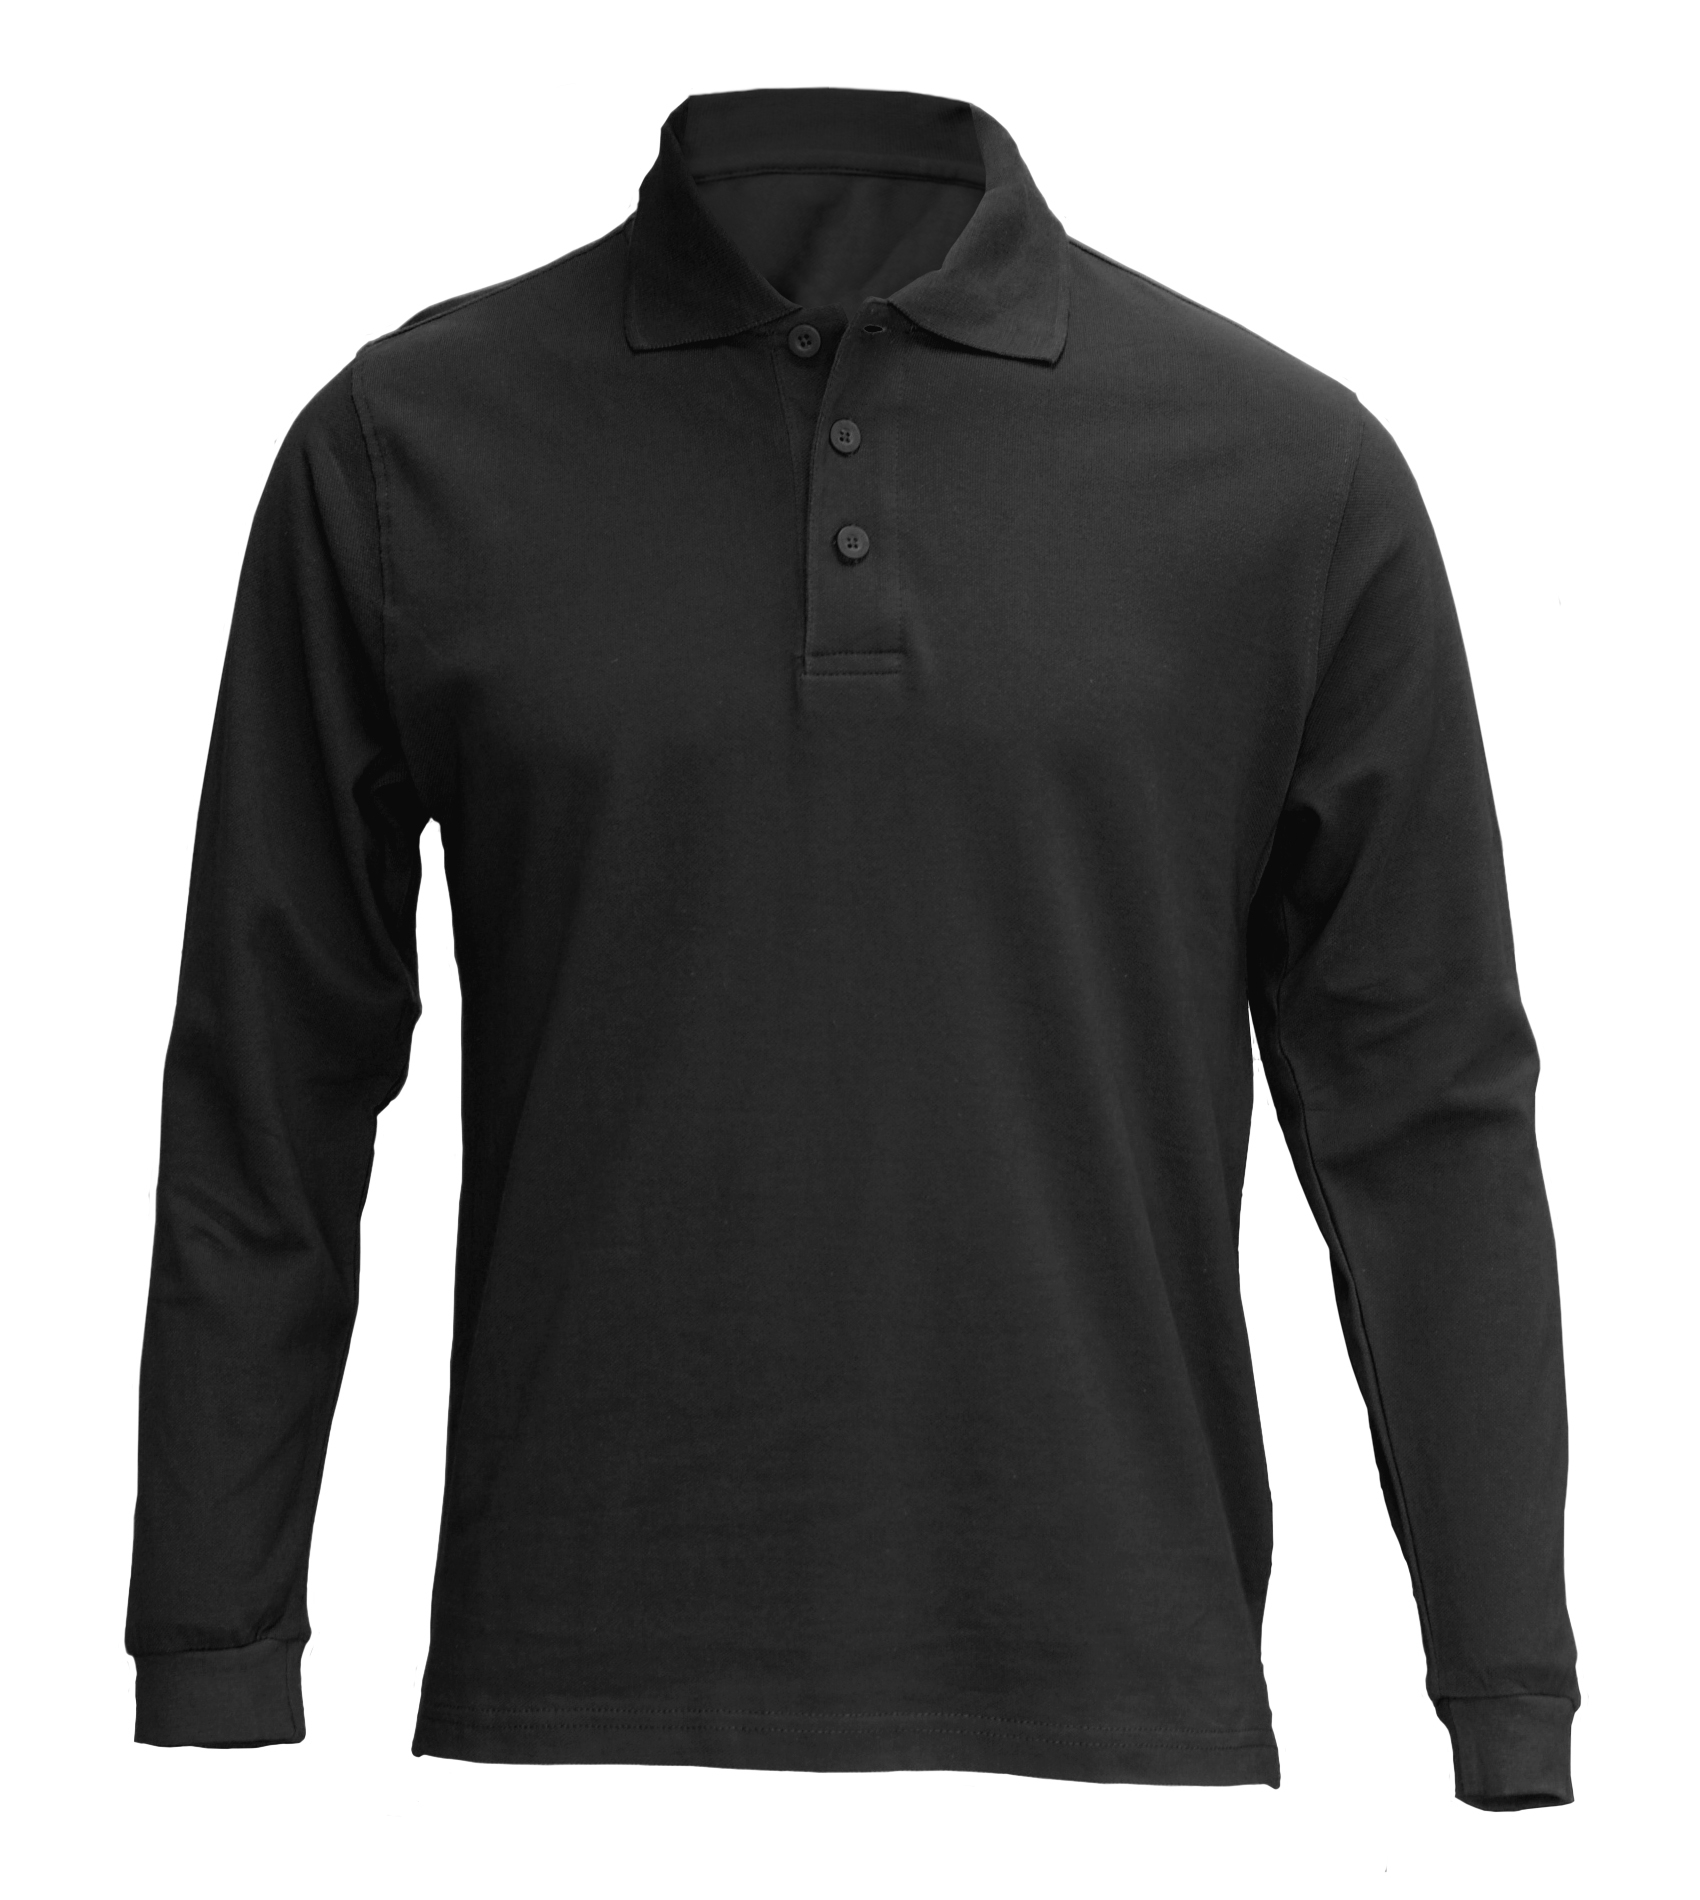 BAW Athletic Wear 985 - Classic Polo Long Sleeve